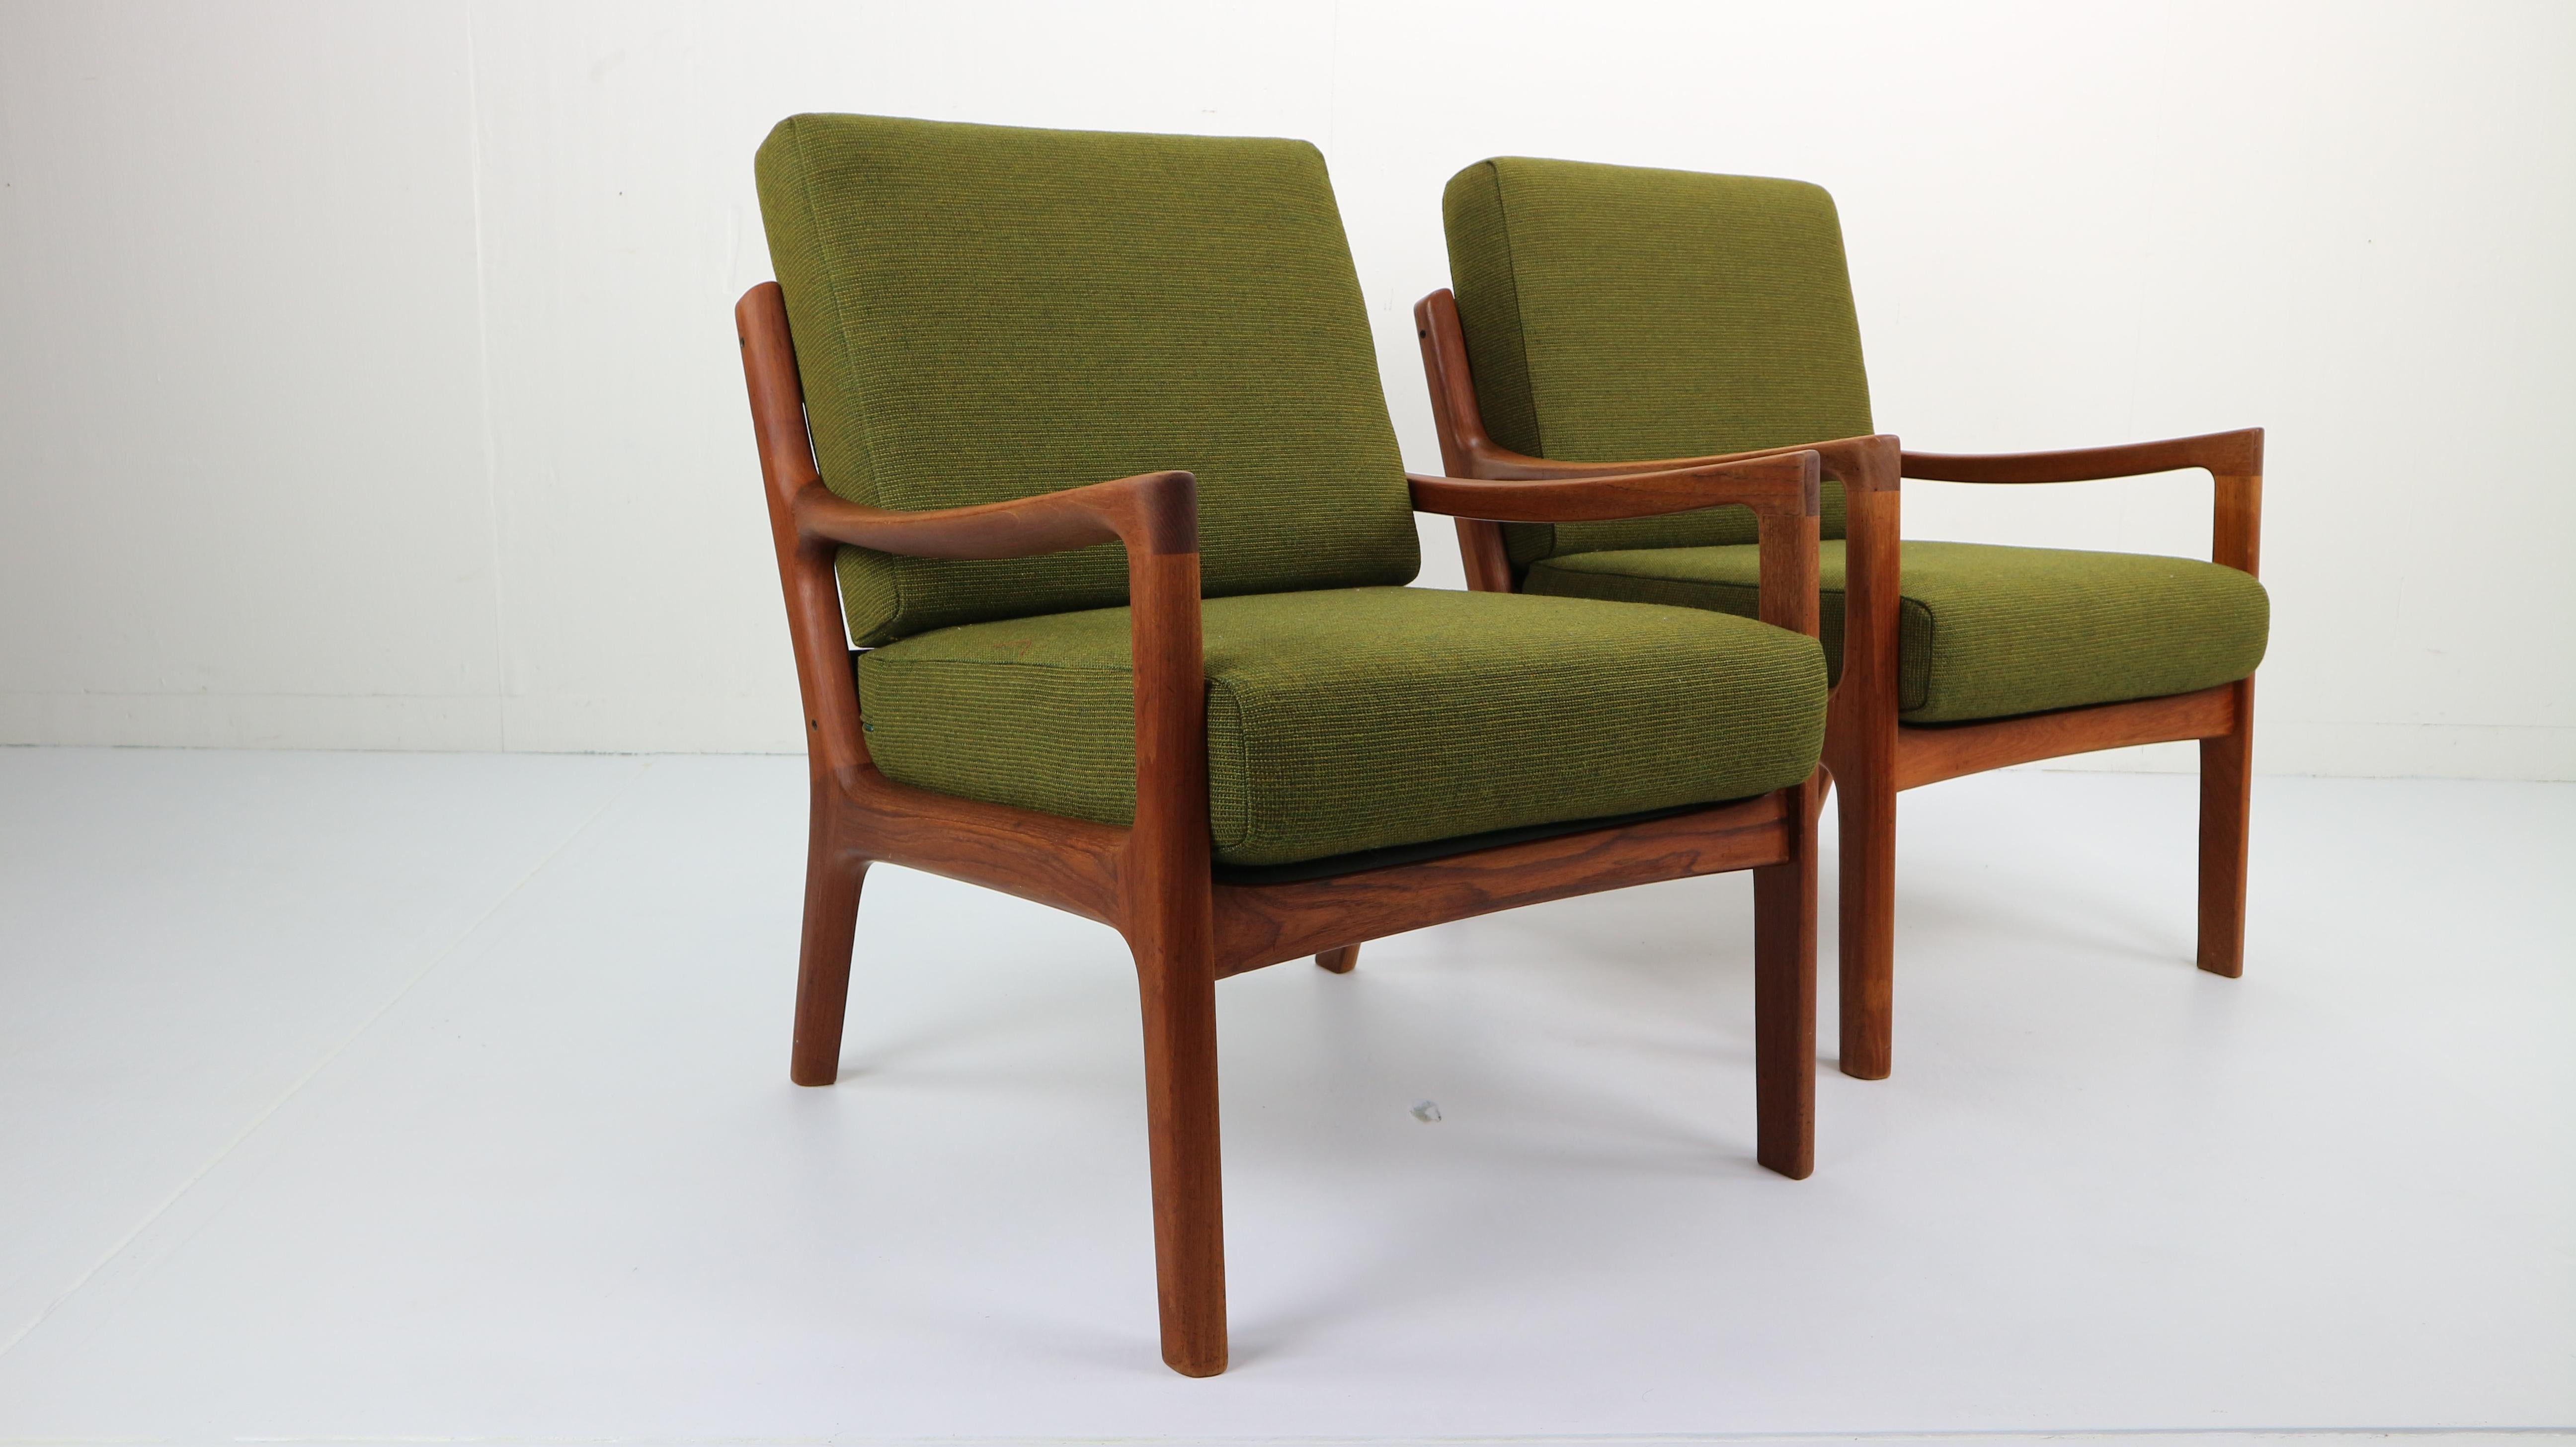 Beautiful pair of Danish design ''Senator'' lounge chairs in teak by Ole Wanscher produced by P. Jeppesen in the 1950s.
The chairs have a solid teak organic sculpted frame and there have been newly upholstered with green high quality wool